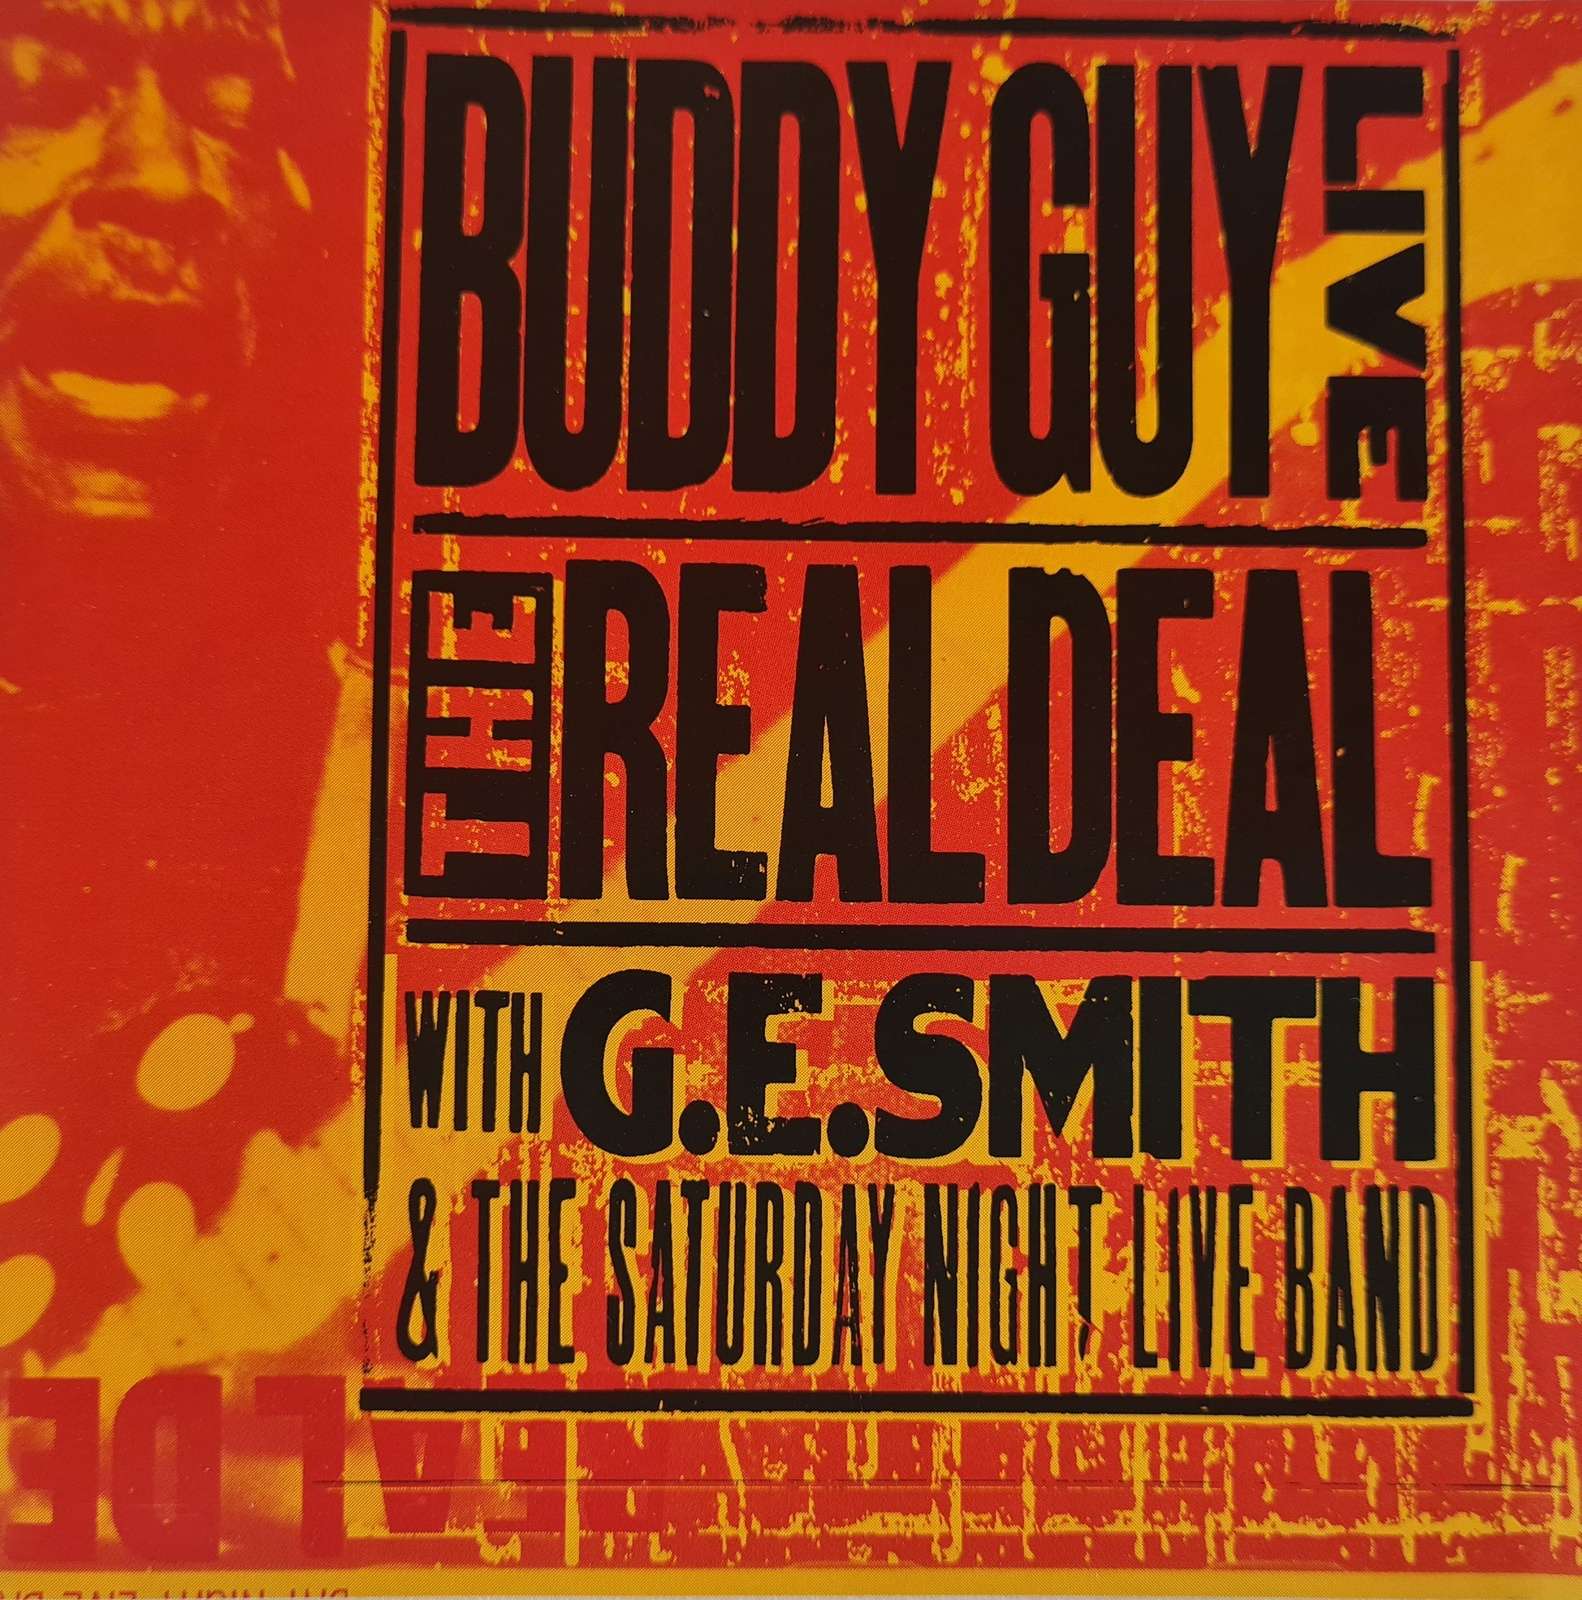 Buddy Guy Live - The Real Deal (CD)